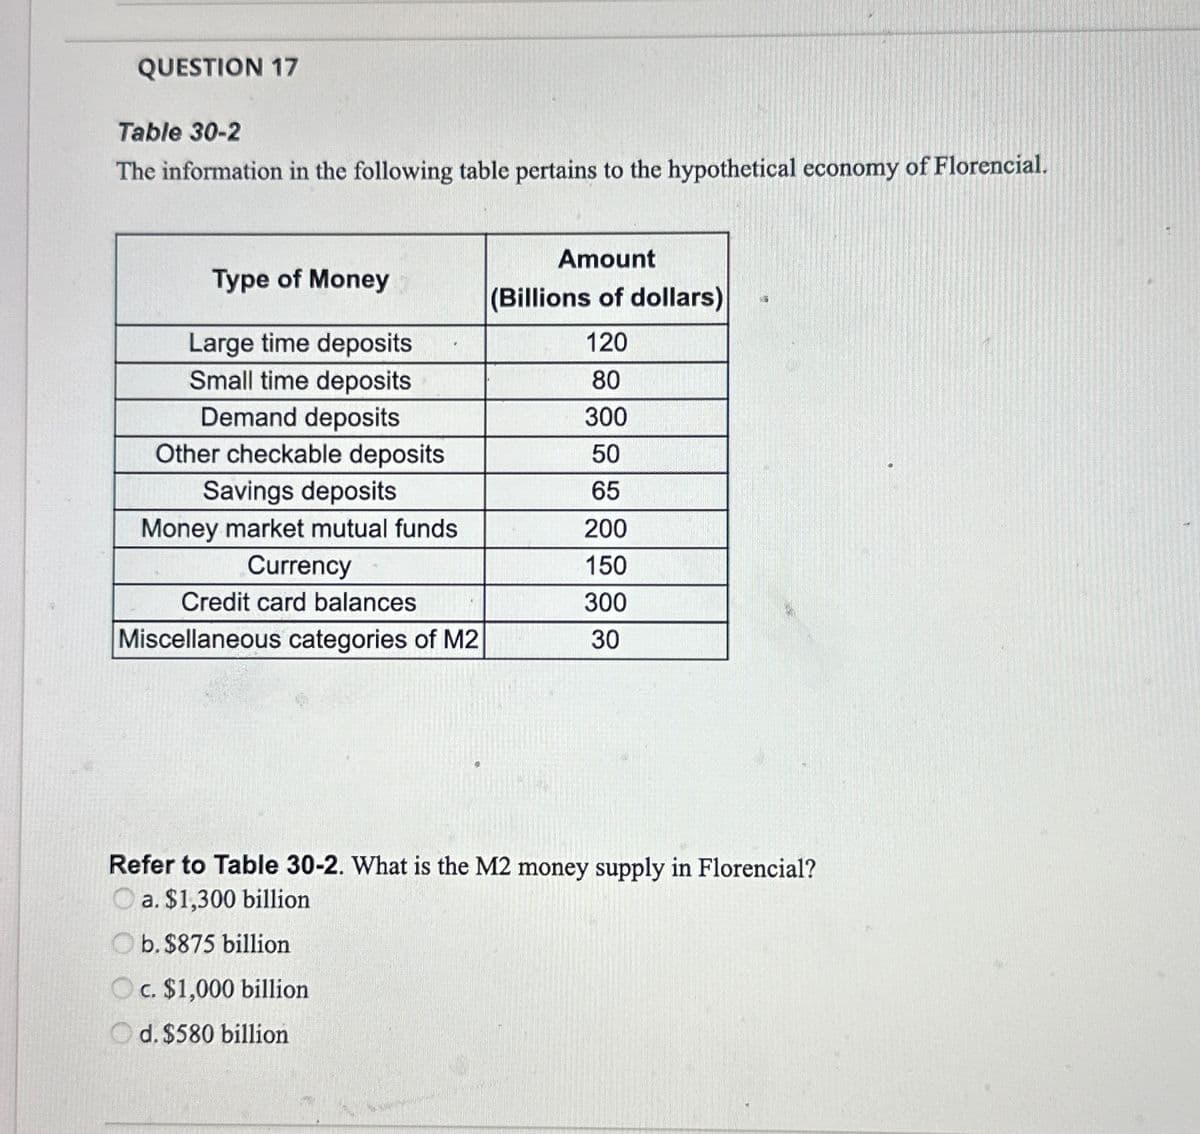 QUESTION 17
Table 30-2
The information in the following table pertains to the hypothetical economy of Florencial.
Type of Money
Amount
(Billions of dollars)
Large time deposits
120
Small time deposits
80
Demand deposits
300
Other checkable deposits
50
Savings deposits
65
Money market mutual funds
200
Currency
150
Credit card balances
300
Miscellaneous categories of M2
30
Refer to Table 30-2. What is the M2 money supply in Florencial?
Oa. $1,300 billion
Ob. $875 billion
Oc. $1,000 billion
Od. $580 billion